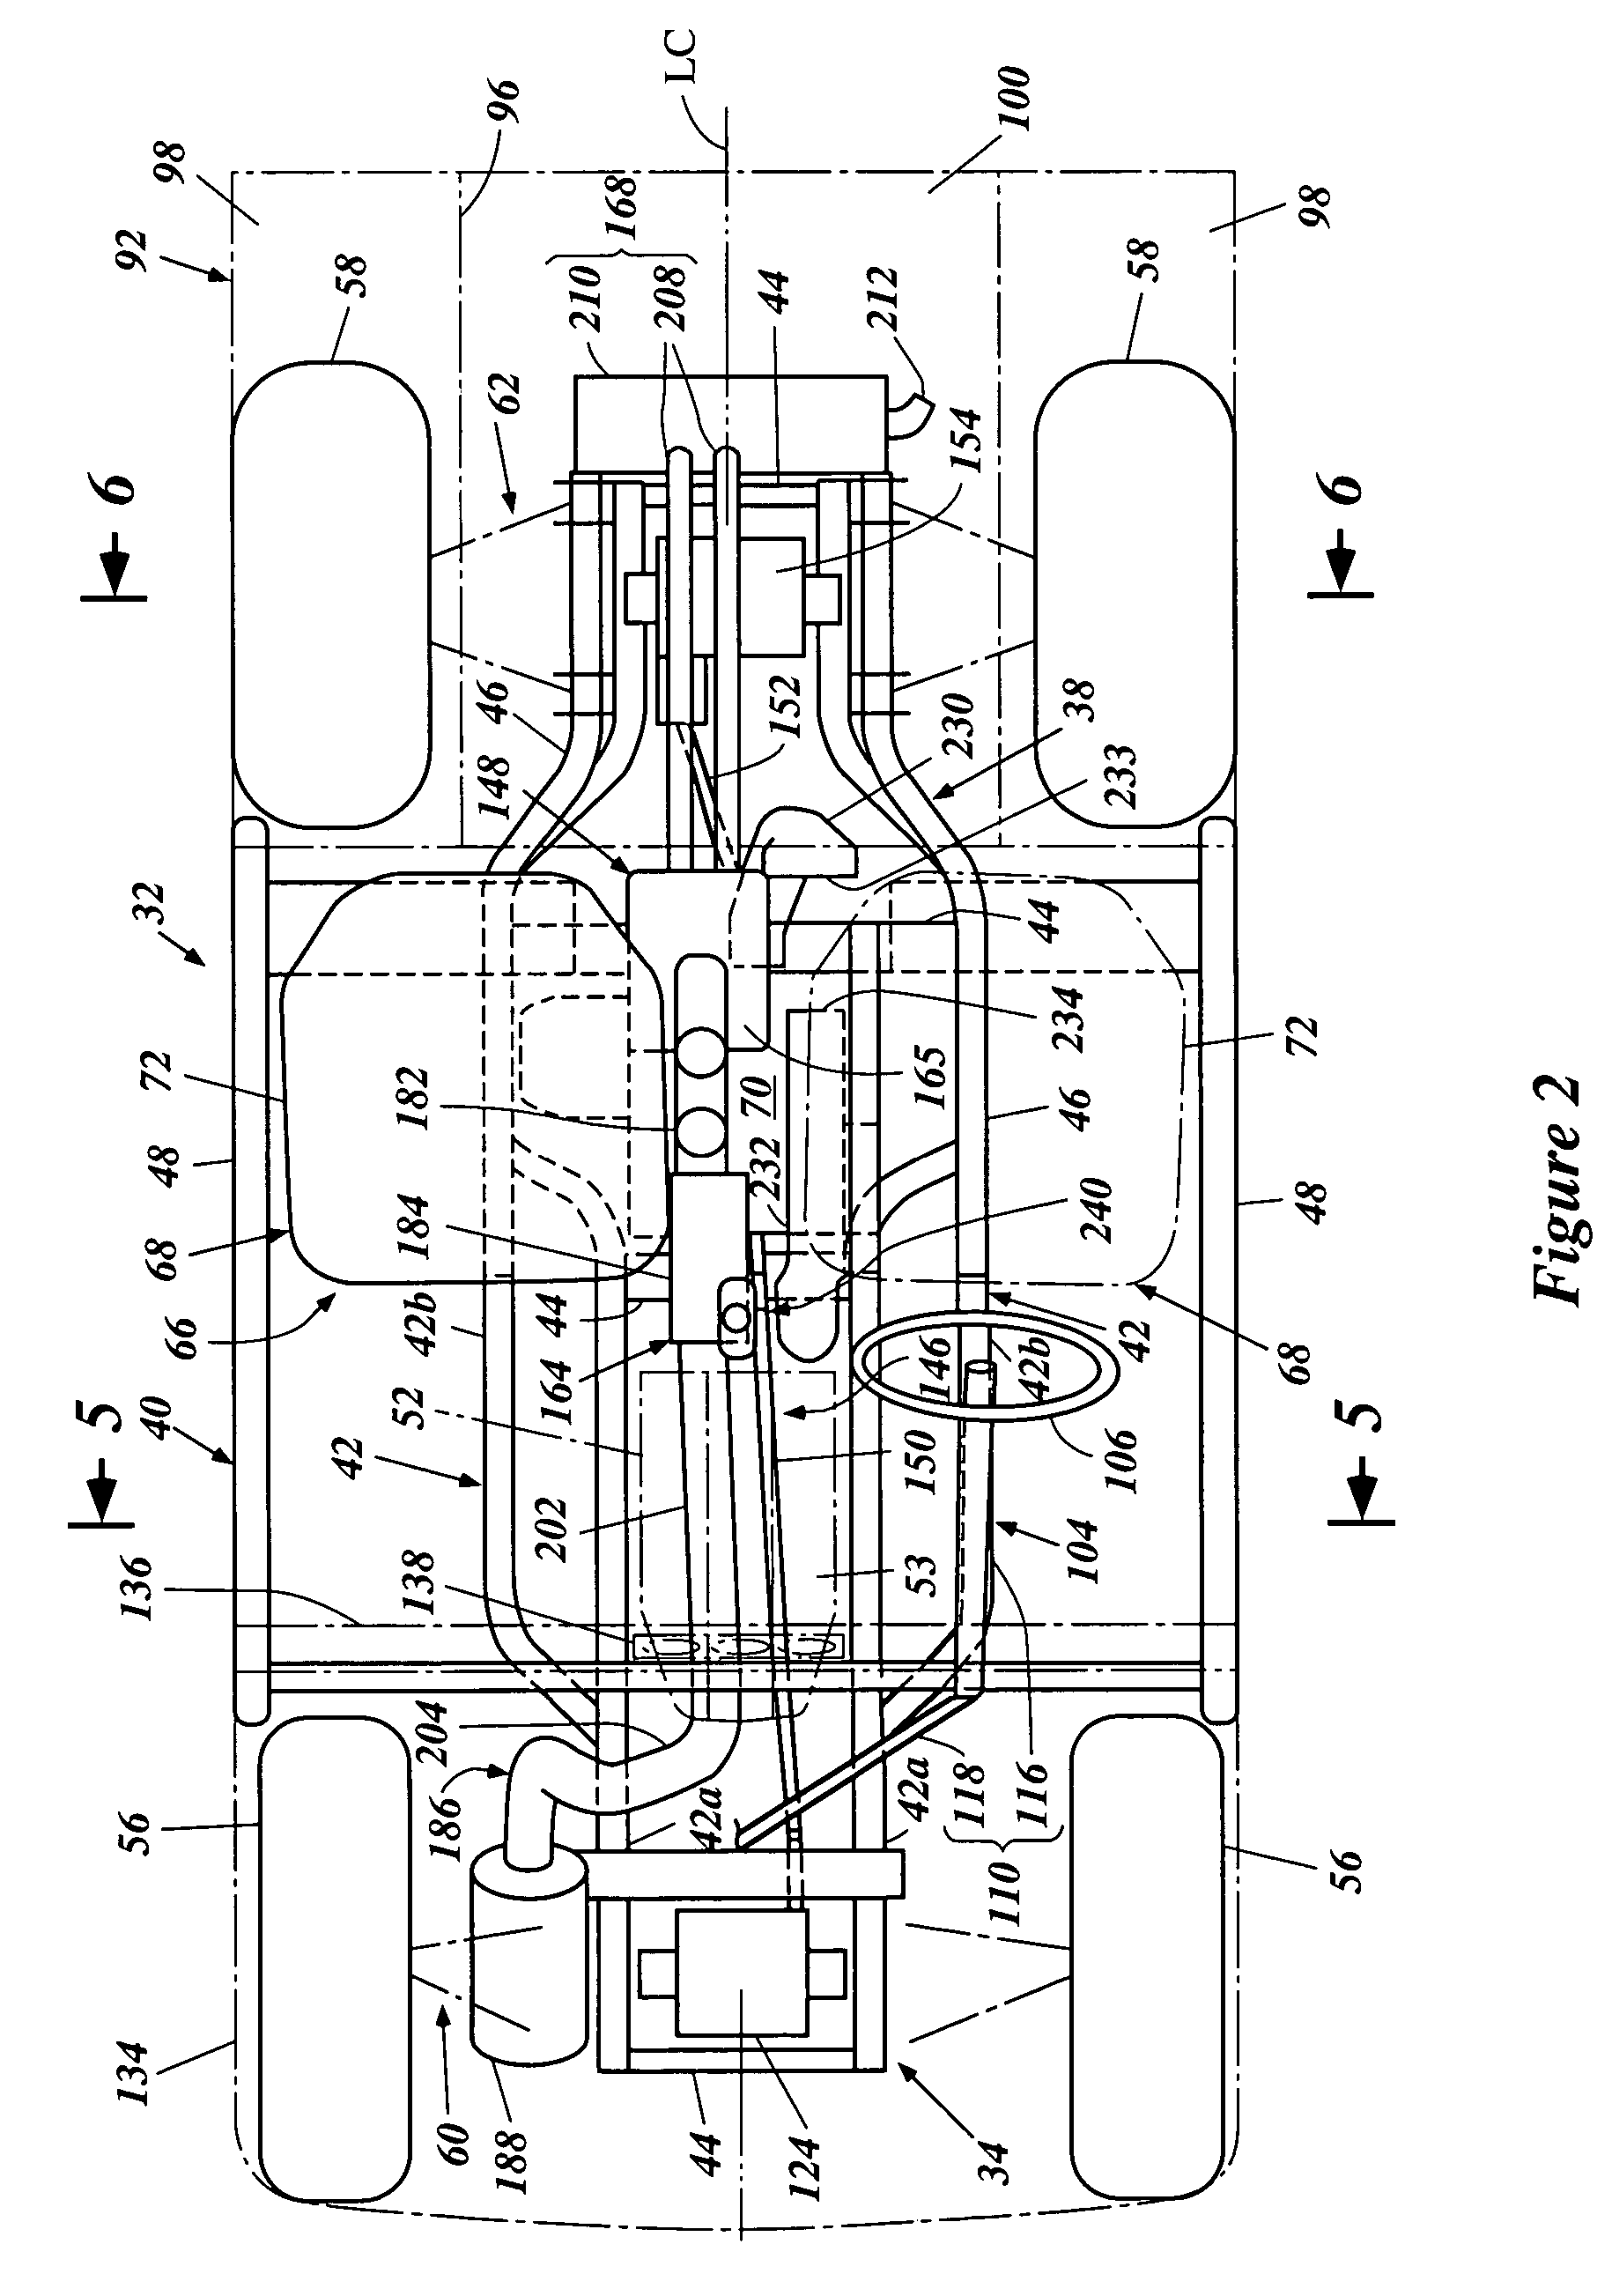 Air intake system for off-road vehicle